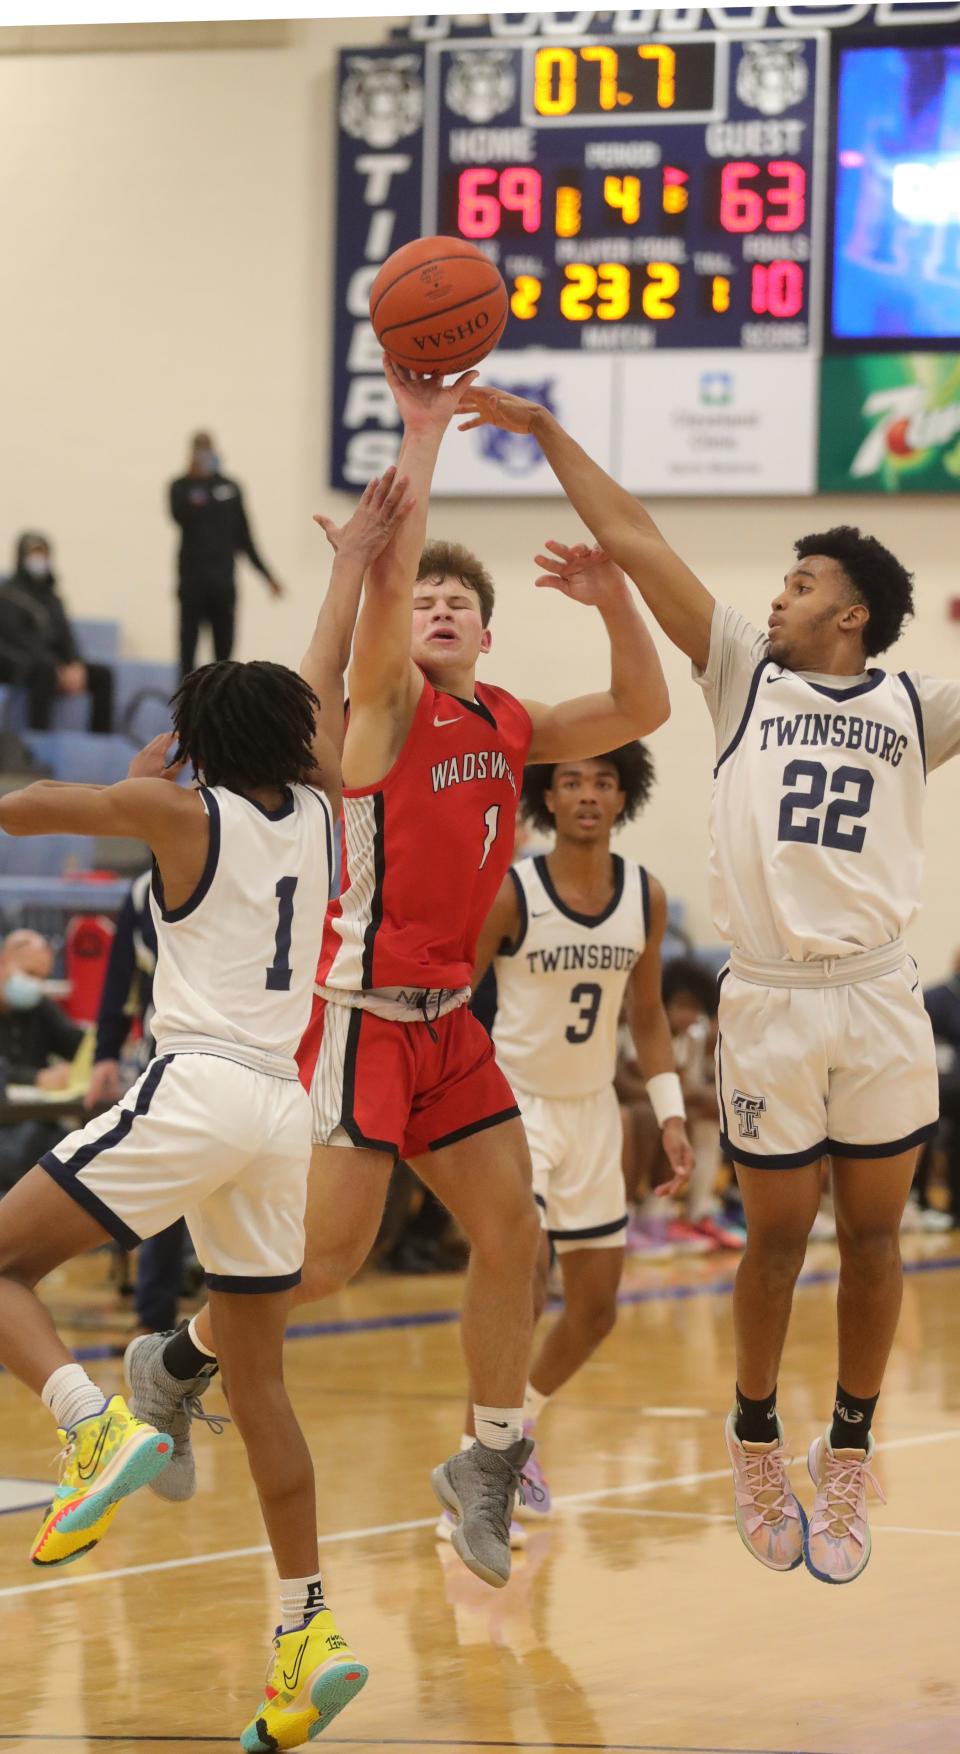 Wadsworth's Maxx Bosley sinks a 3-point shot with seven seconds remaining in the game as Twinsburg's Jayden Patton, left, and Adam Williams defend on Friday in Twinsburg. [Phil Masturzo/Beacon Journal]